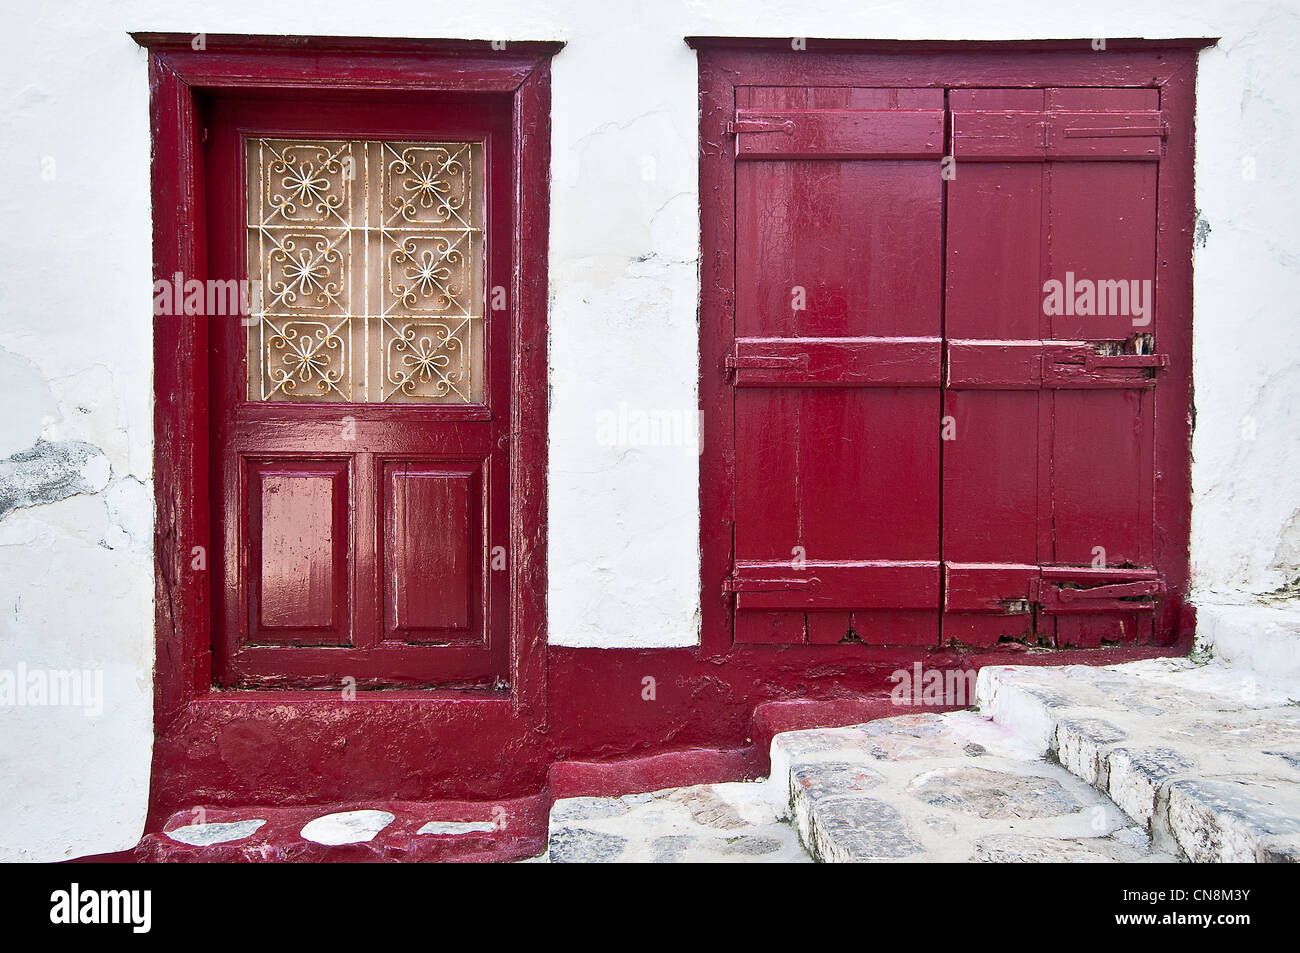 Old house in Hydra island, Greece with doors and shutter blinds painted in red Stock Photo